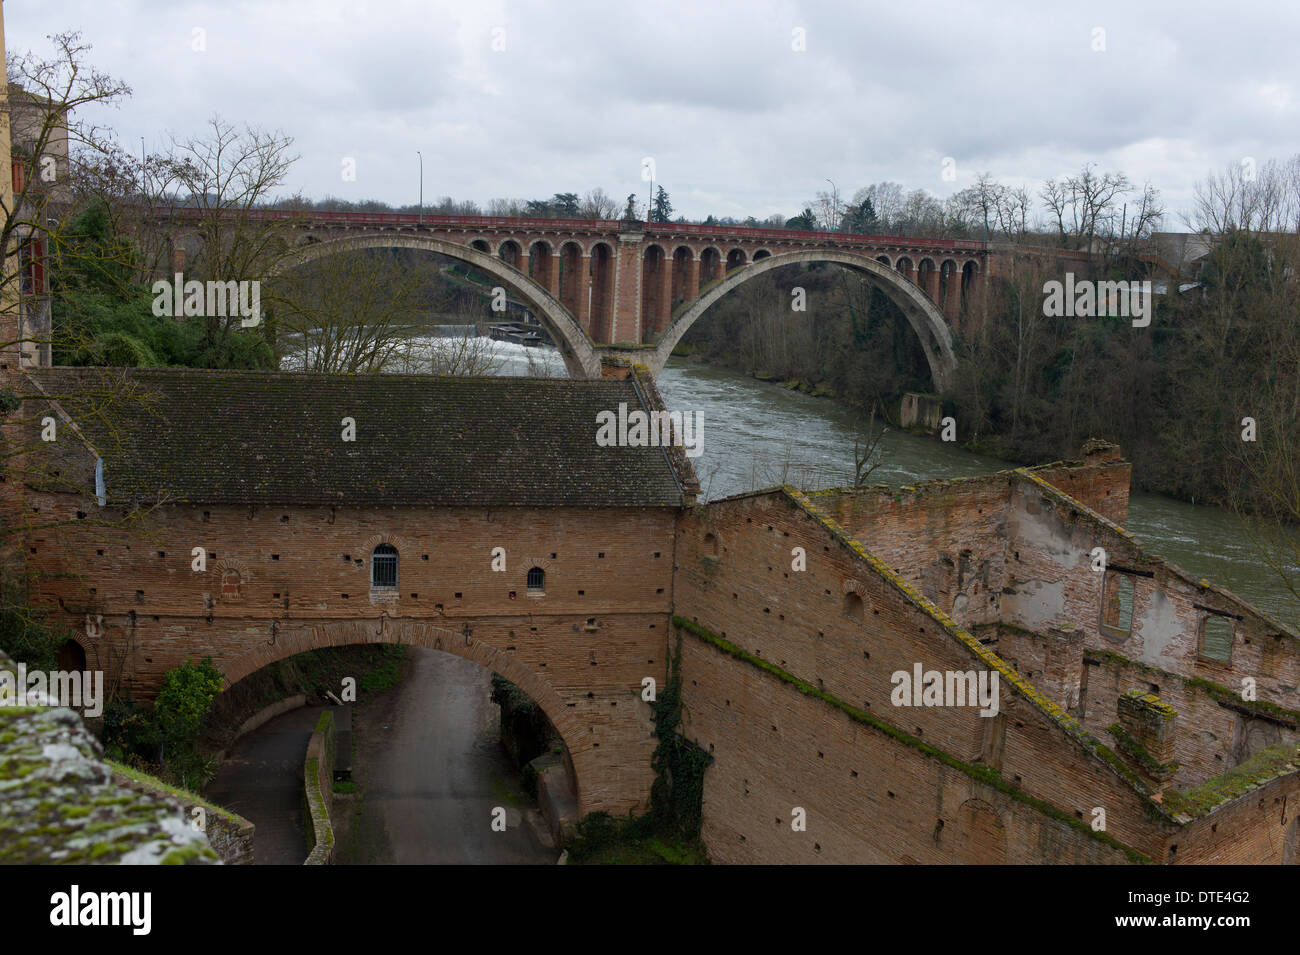 The arched bridge at Rabastens, a town on the Tarn river, in the department of Tarn, Occitanie, France in winter Stock Photo